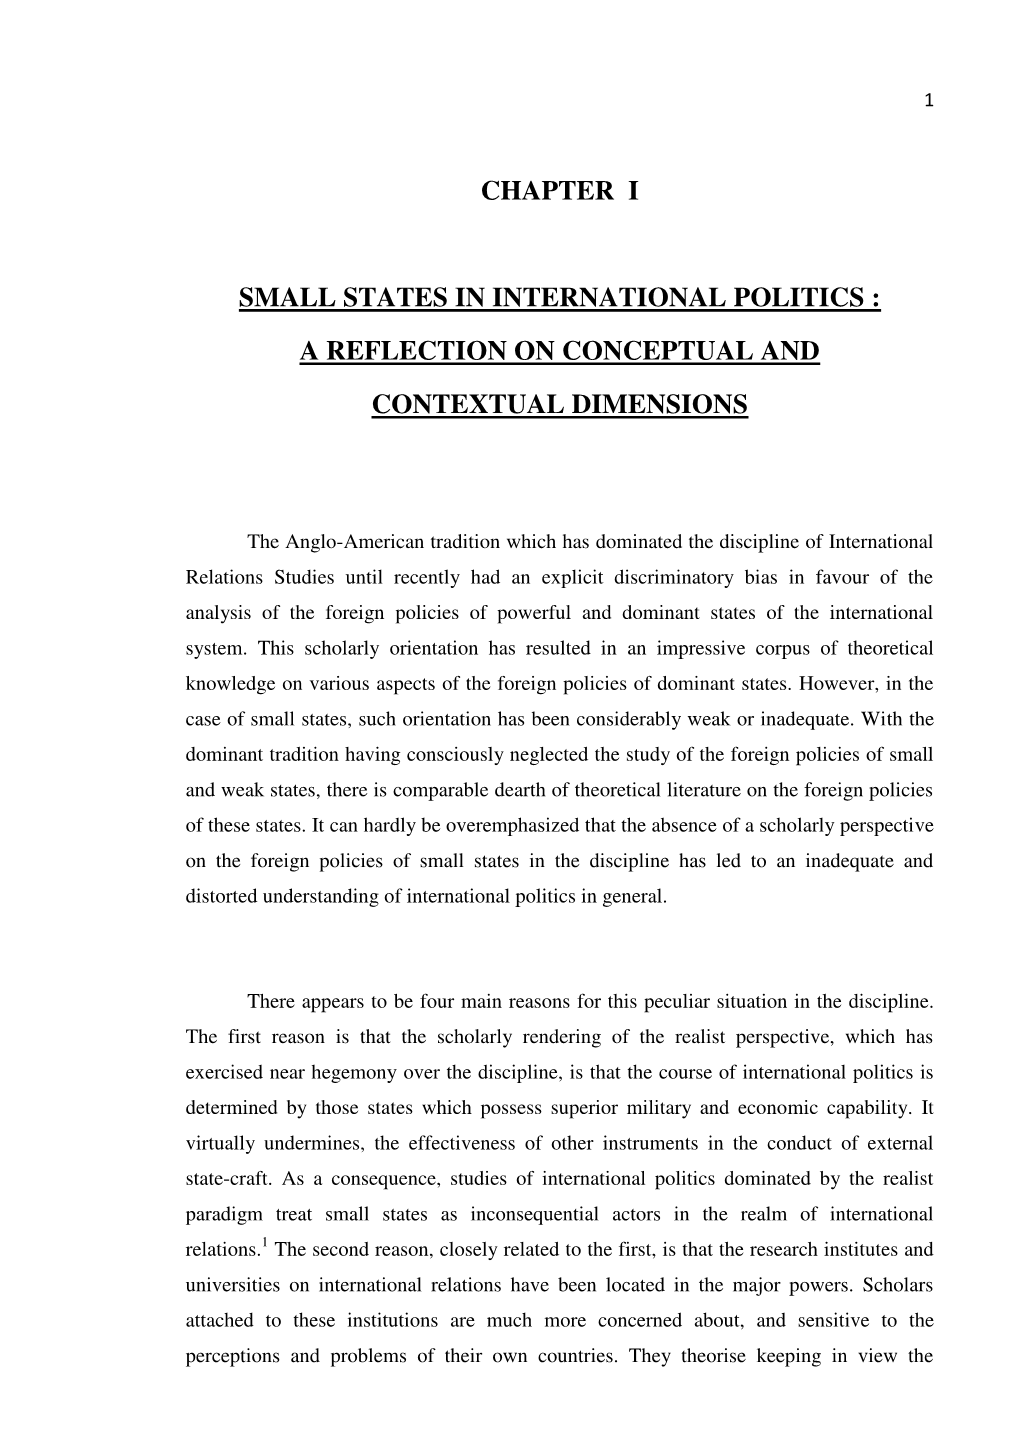 Chapter I Small States in International Politics : a Reflection on Conceptual and Contextual Dimensions